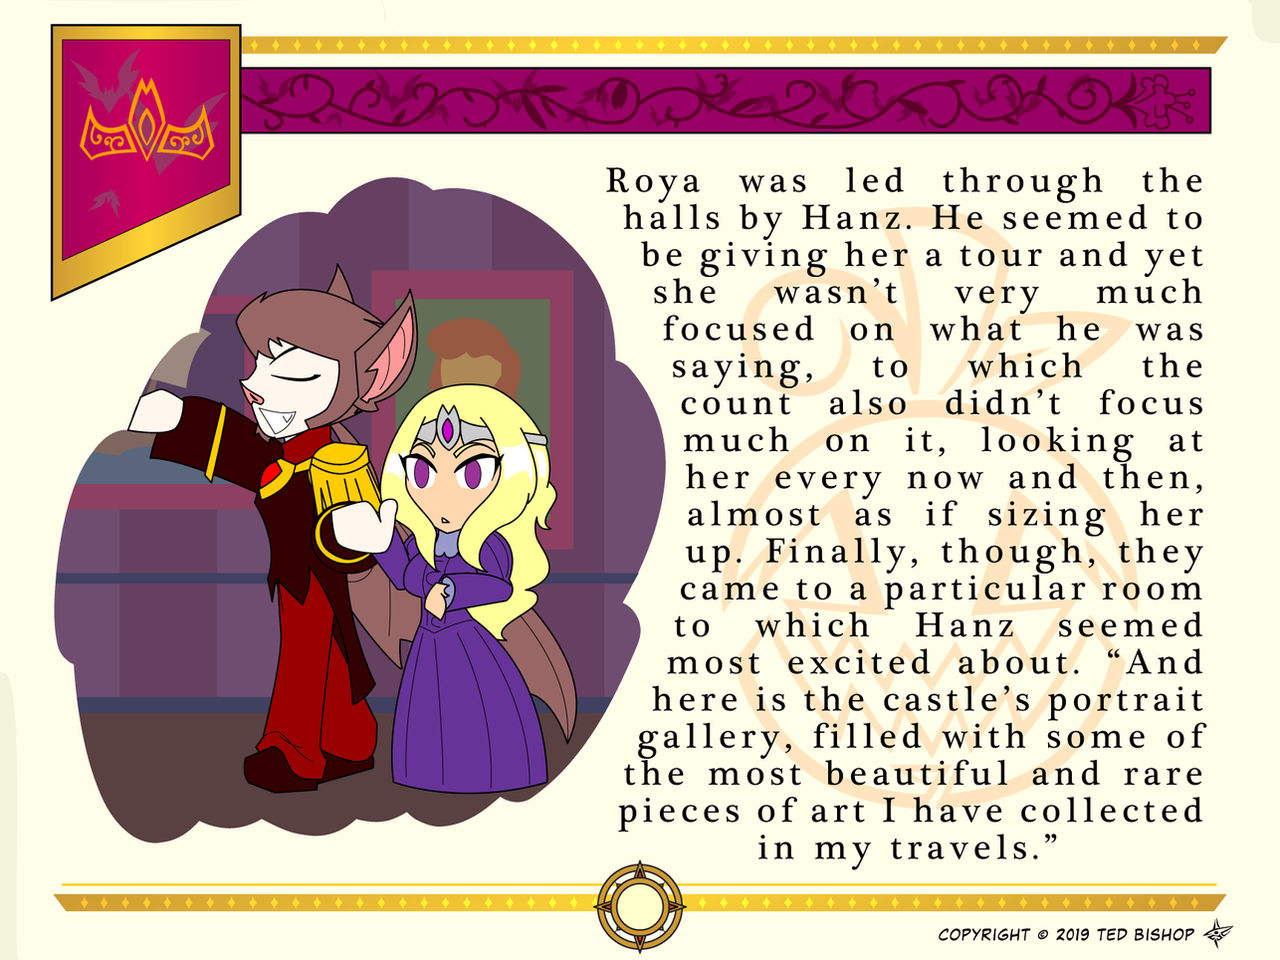 Another Princess Story - Portrait Hall by Dragon-FangX on DeviantArt